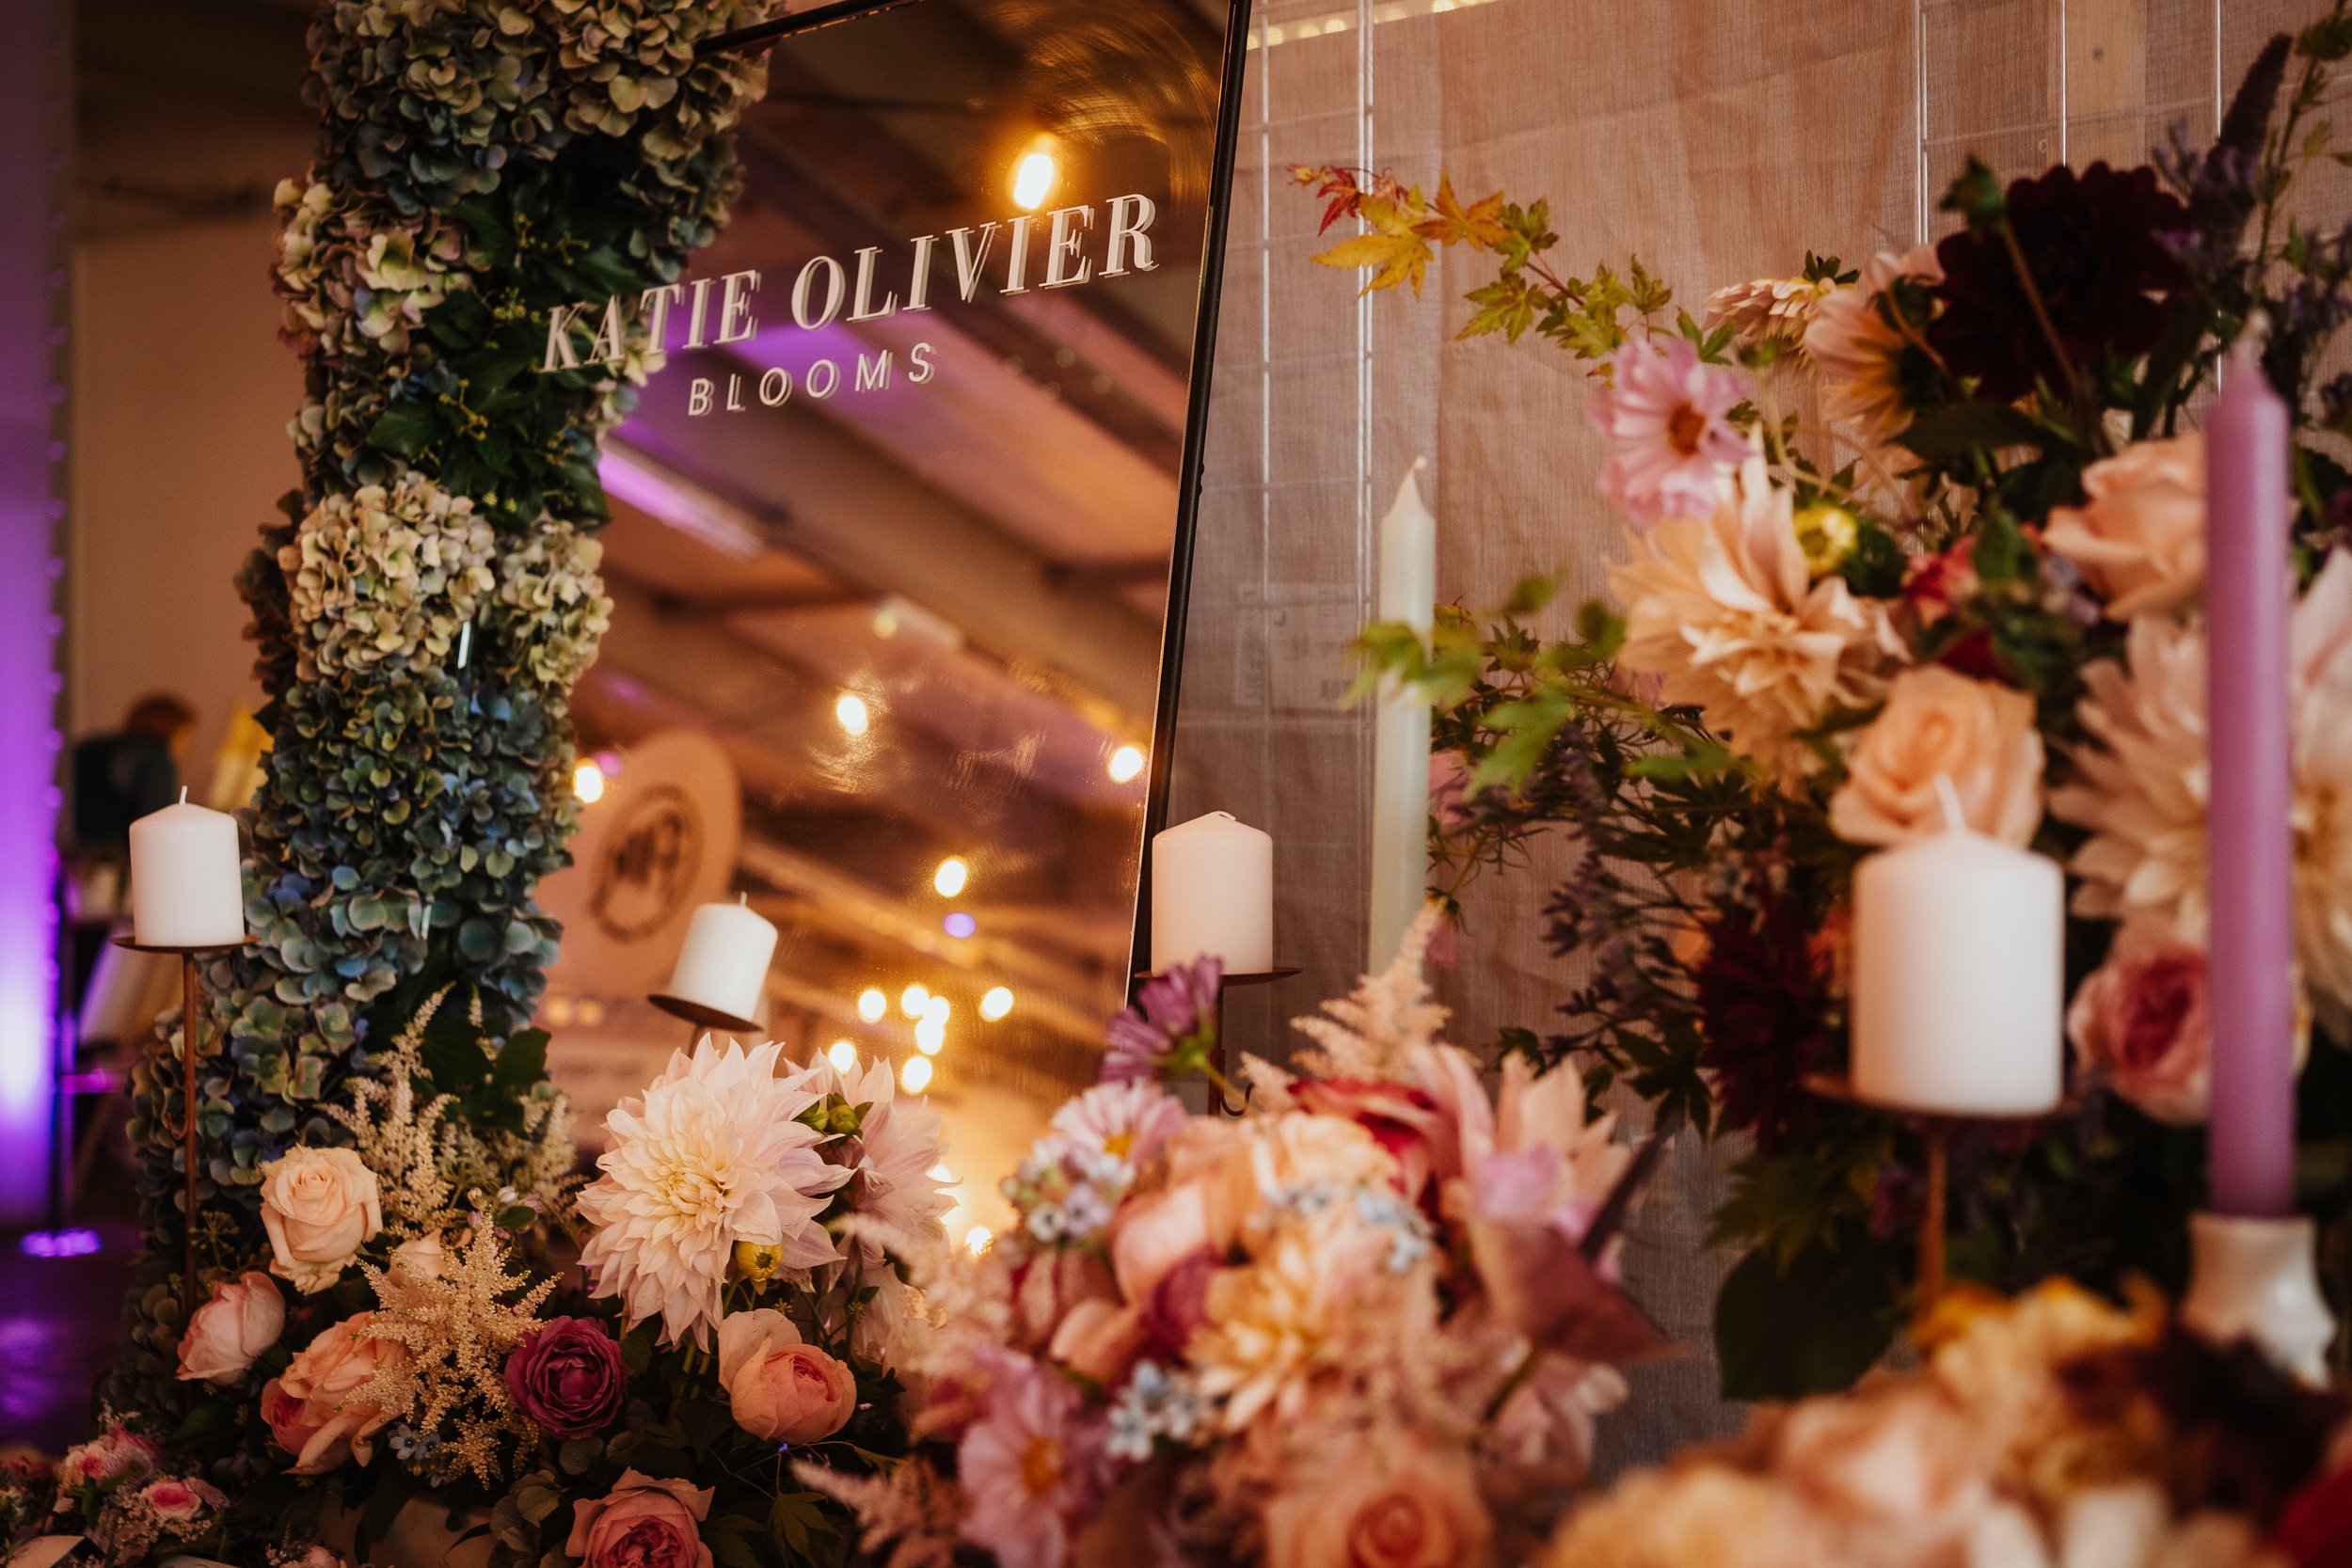  A beautiful floral display by Katie Olivier Blooms at The Un-Wedding Show Sheffield.  